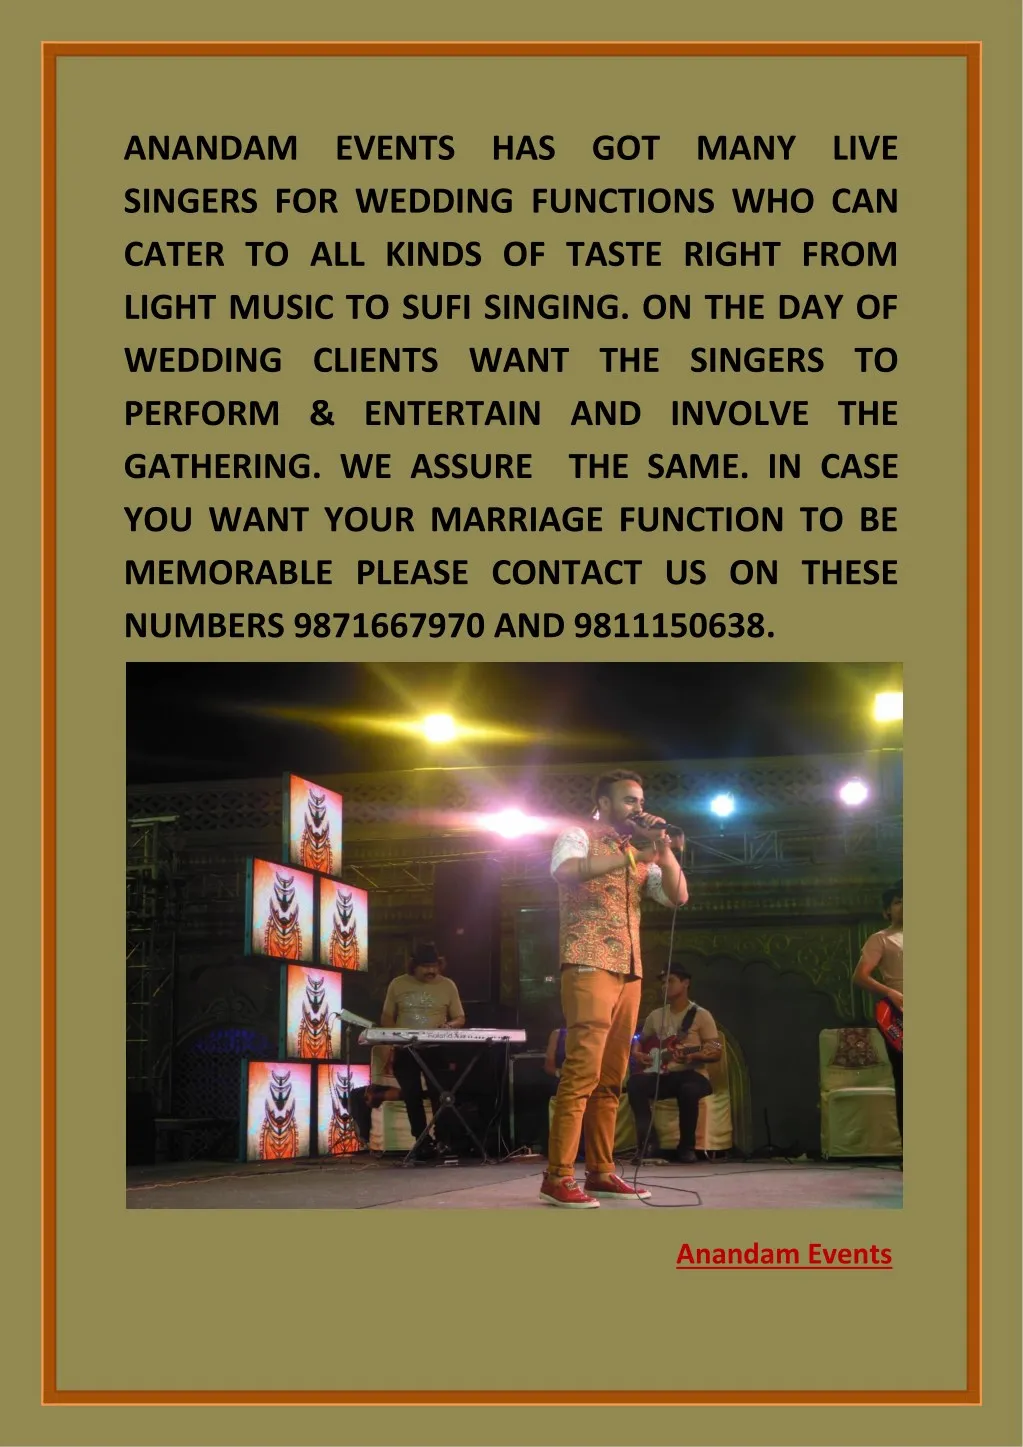 anandam events has got many live singers